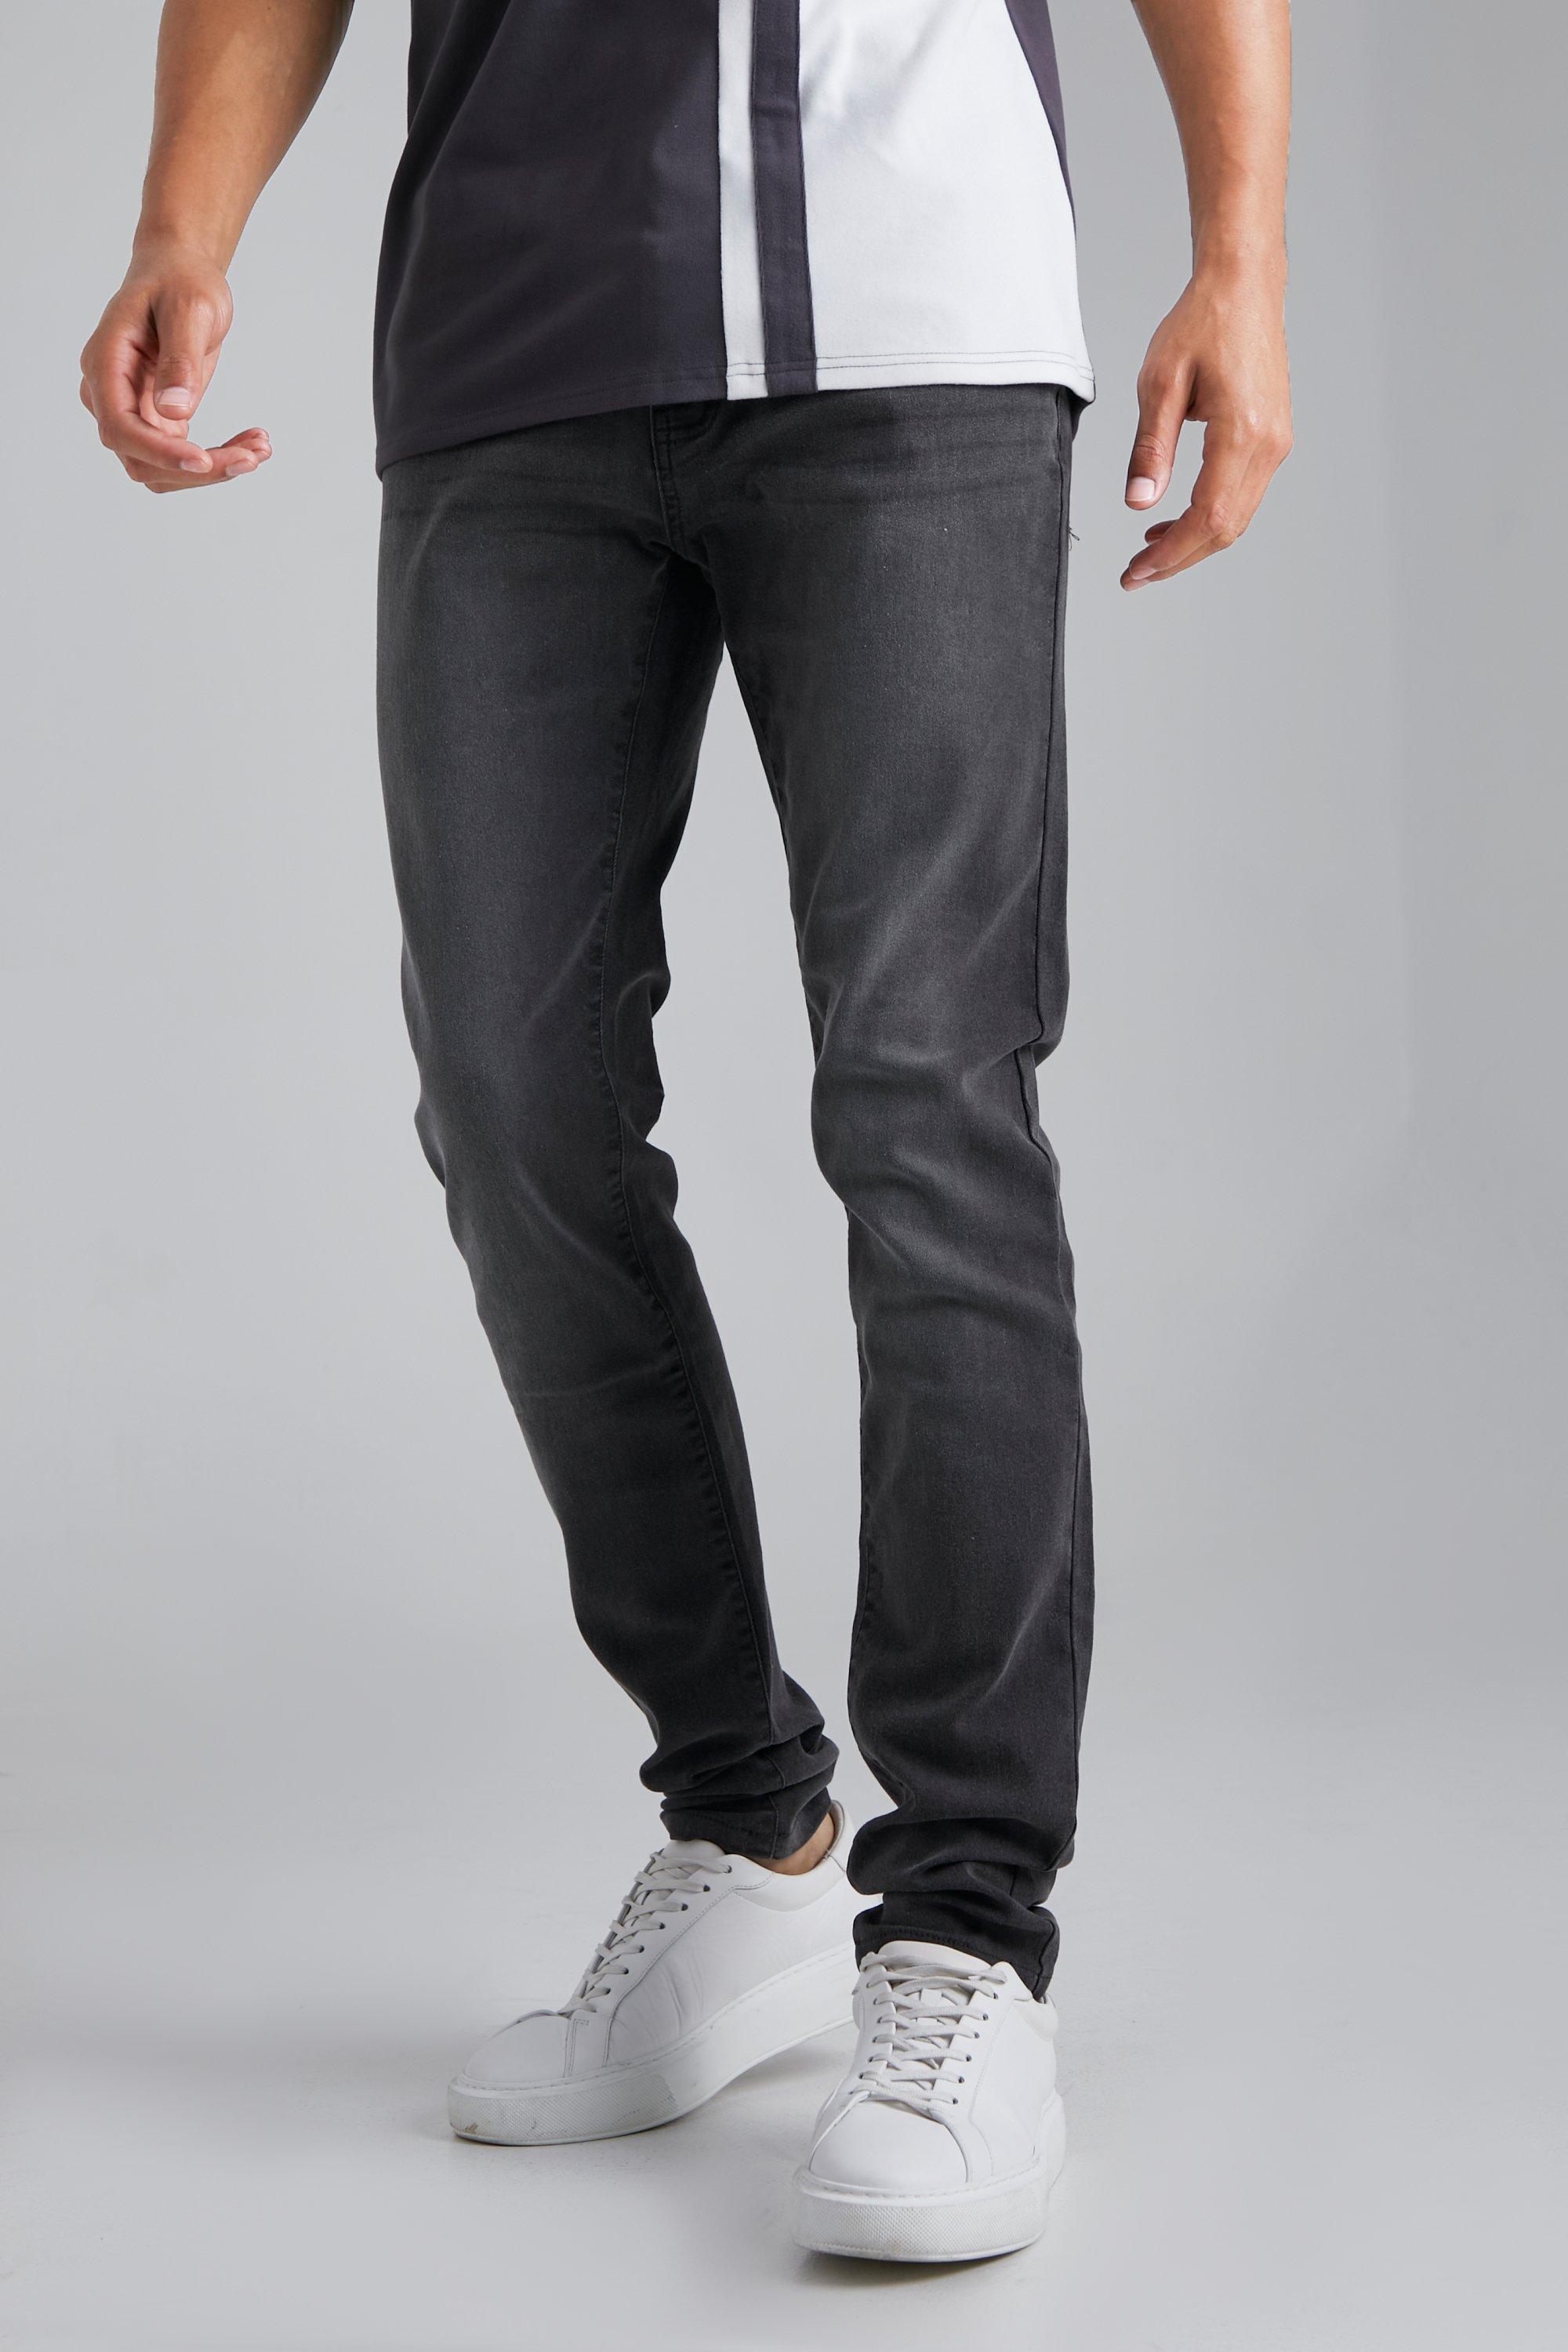 for Men Grey BoohooMAN Denim Tall Stretch Skinny Fit Jeans in Charcoal Mens Jeans BoohooMAN Jeans 